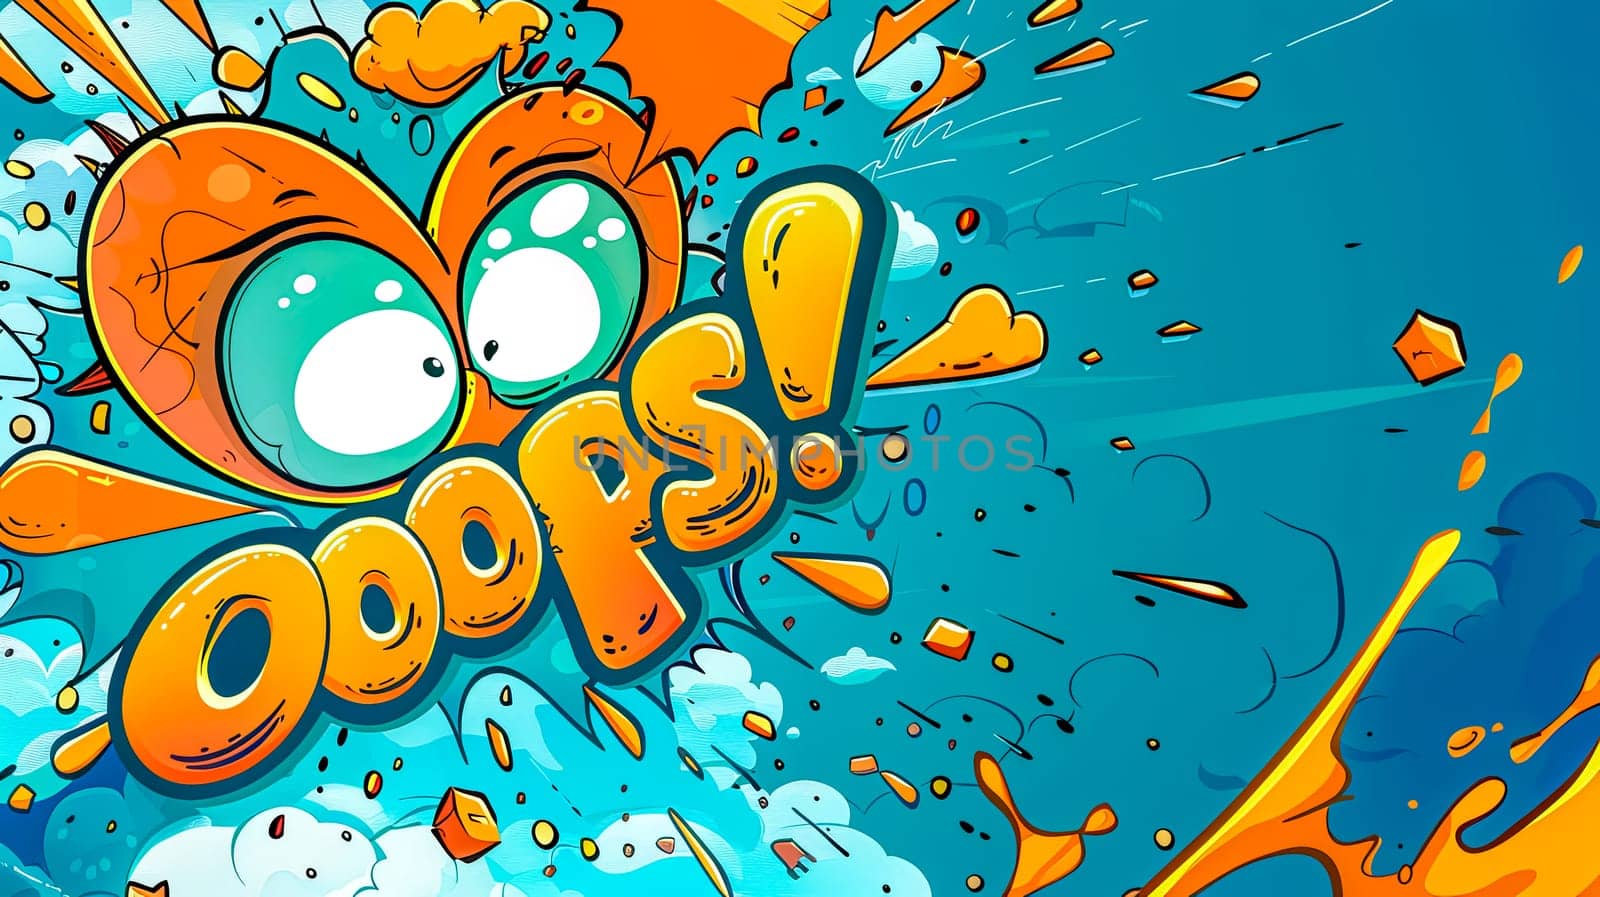 Colorful oops comic expression wallpaper by Edophoto